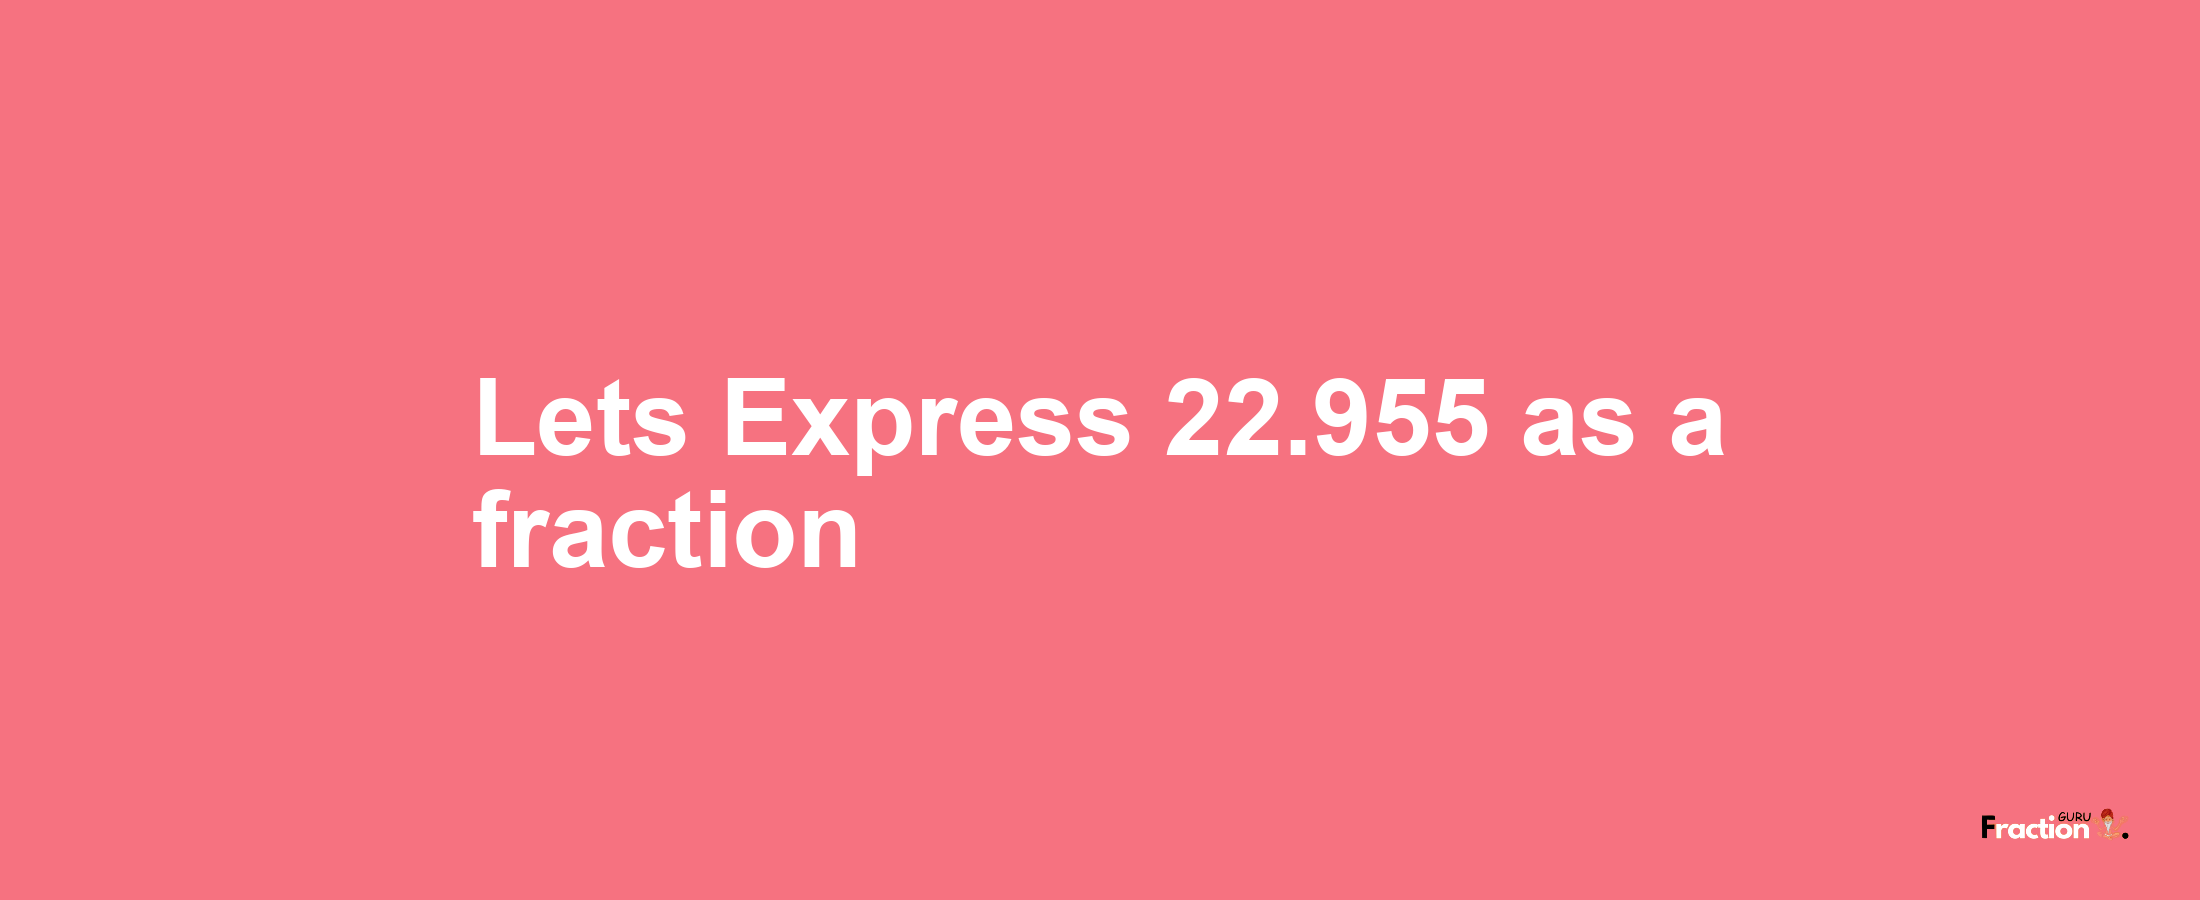 Lets Express 22.955 as afraction